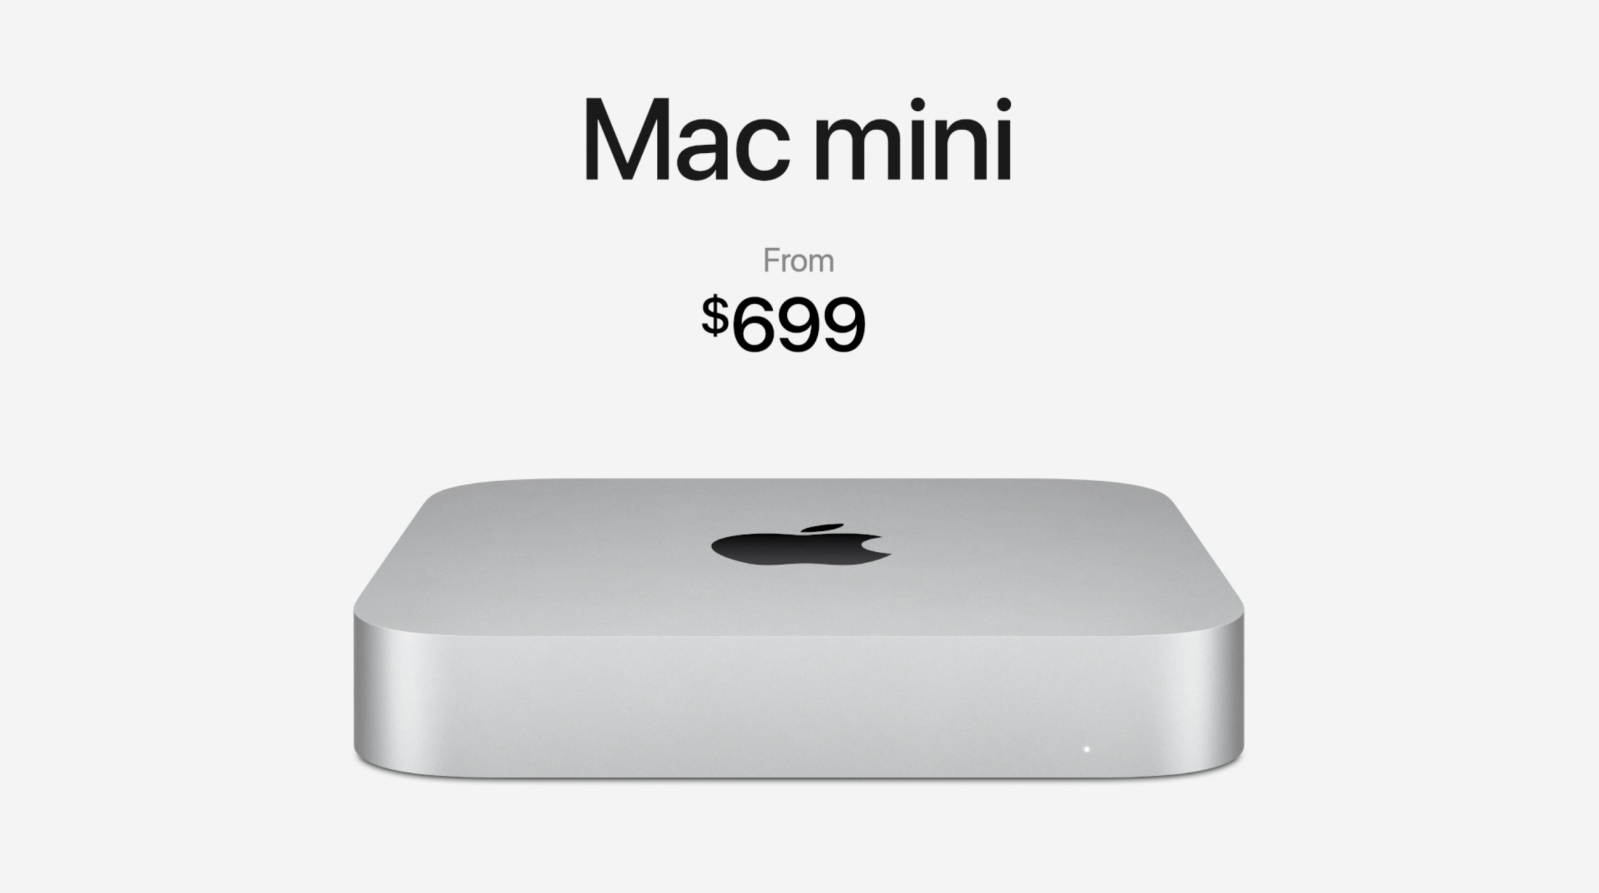 Apple Mac mini M1 Pro And M1 Max - What We Know